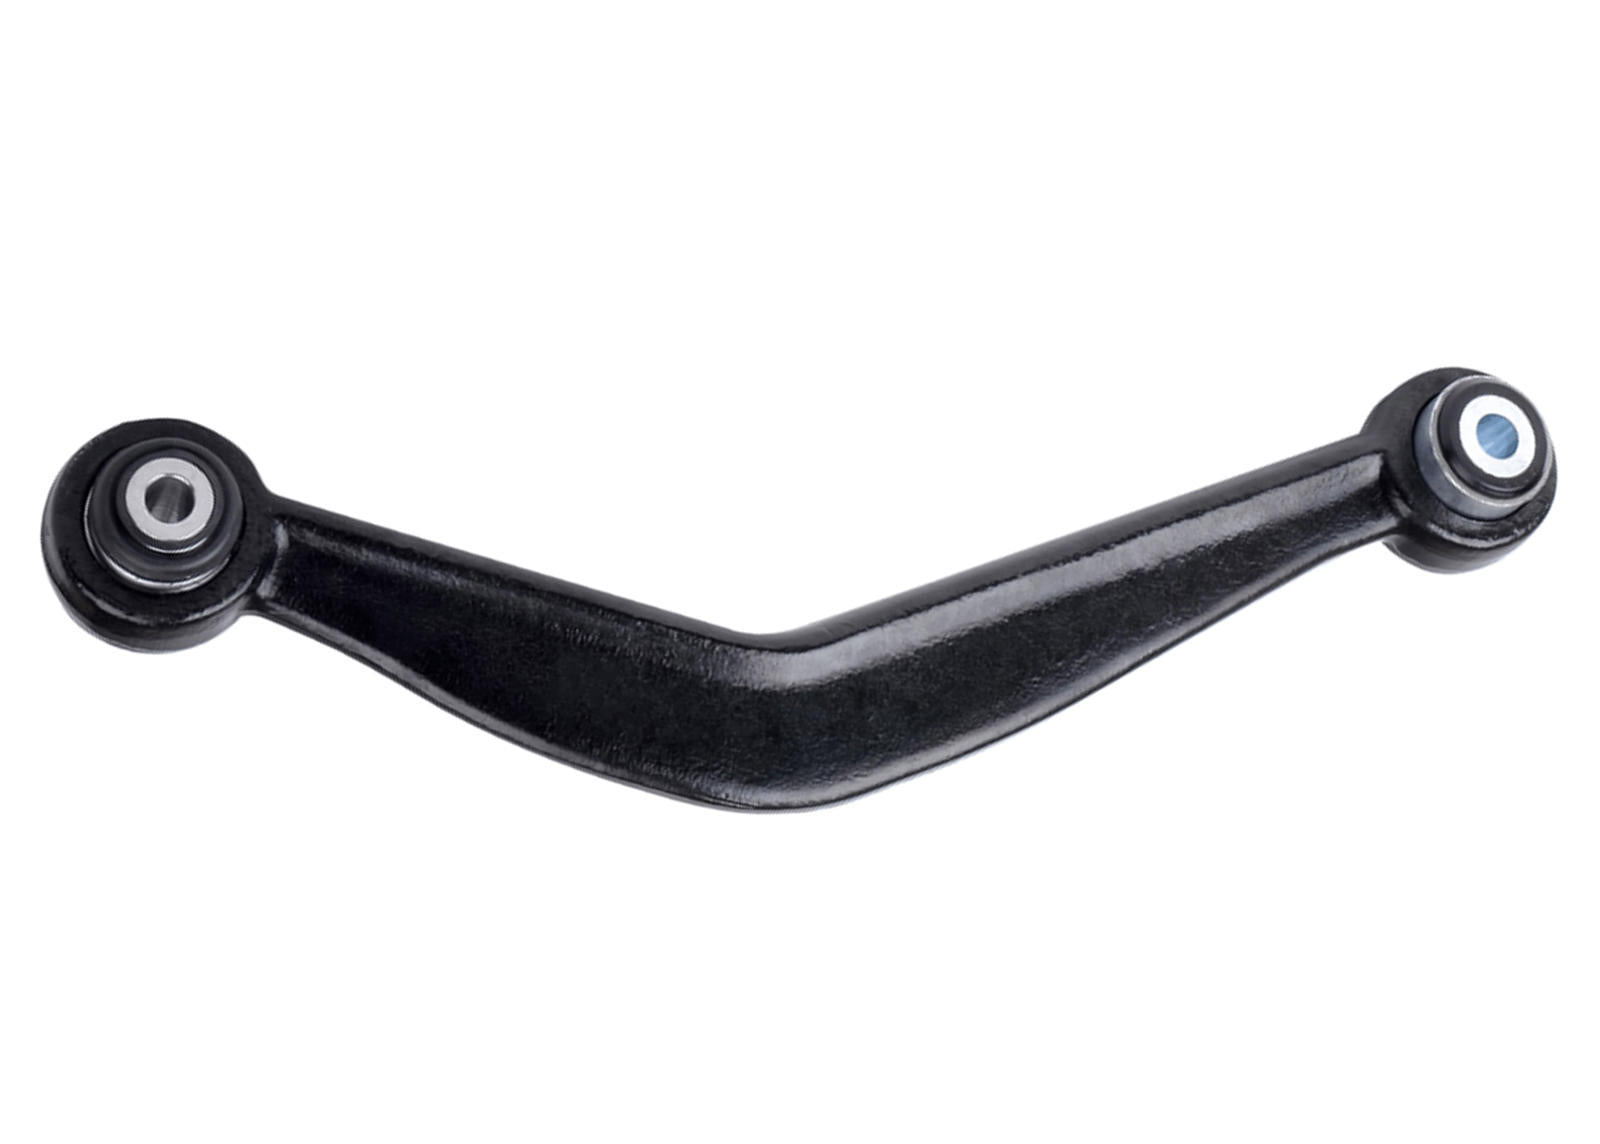 Rear Control Arm Upper - Arm to Suit Ford Falcon/Fairlane BA-FGX, Territory SX-SZ and FPV (WA438)